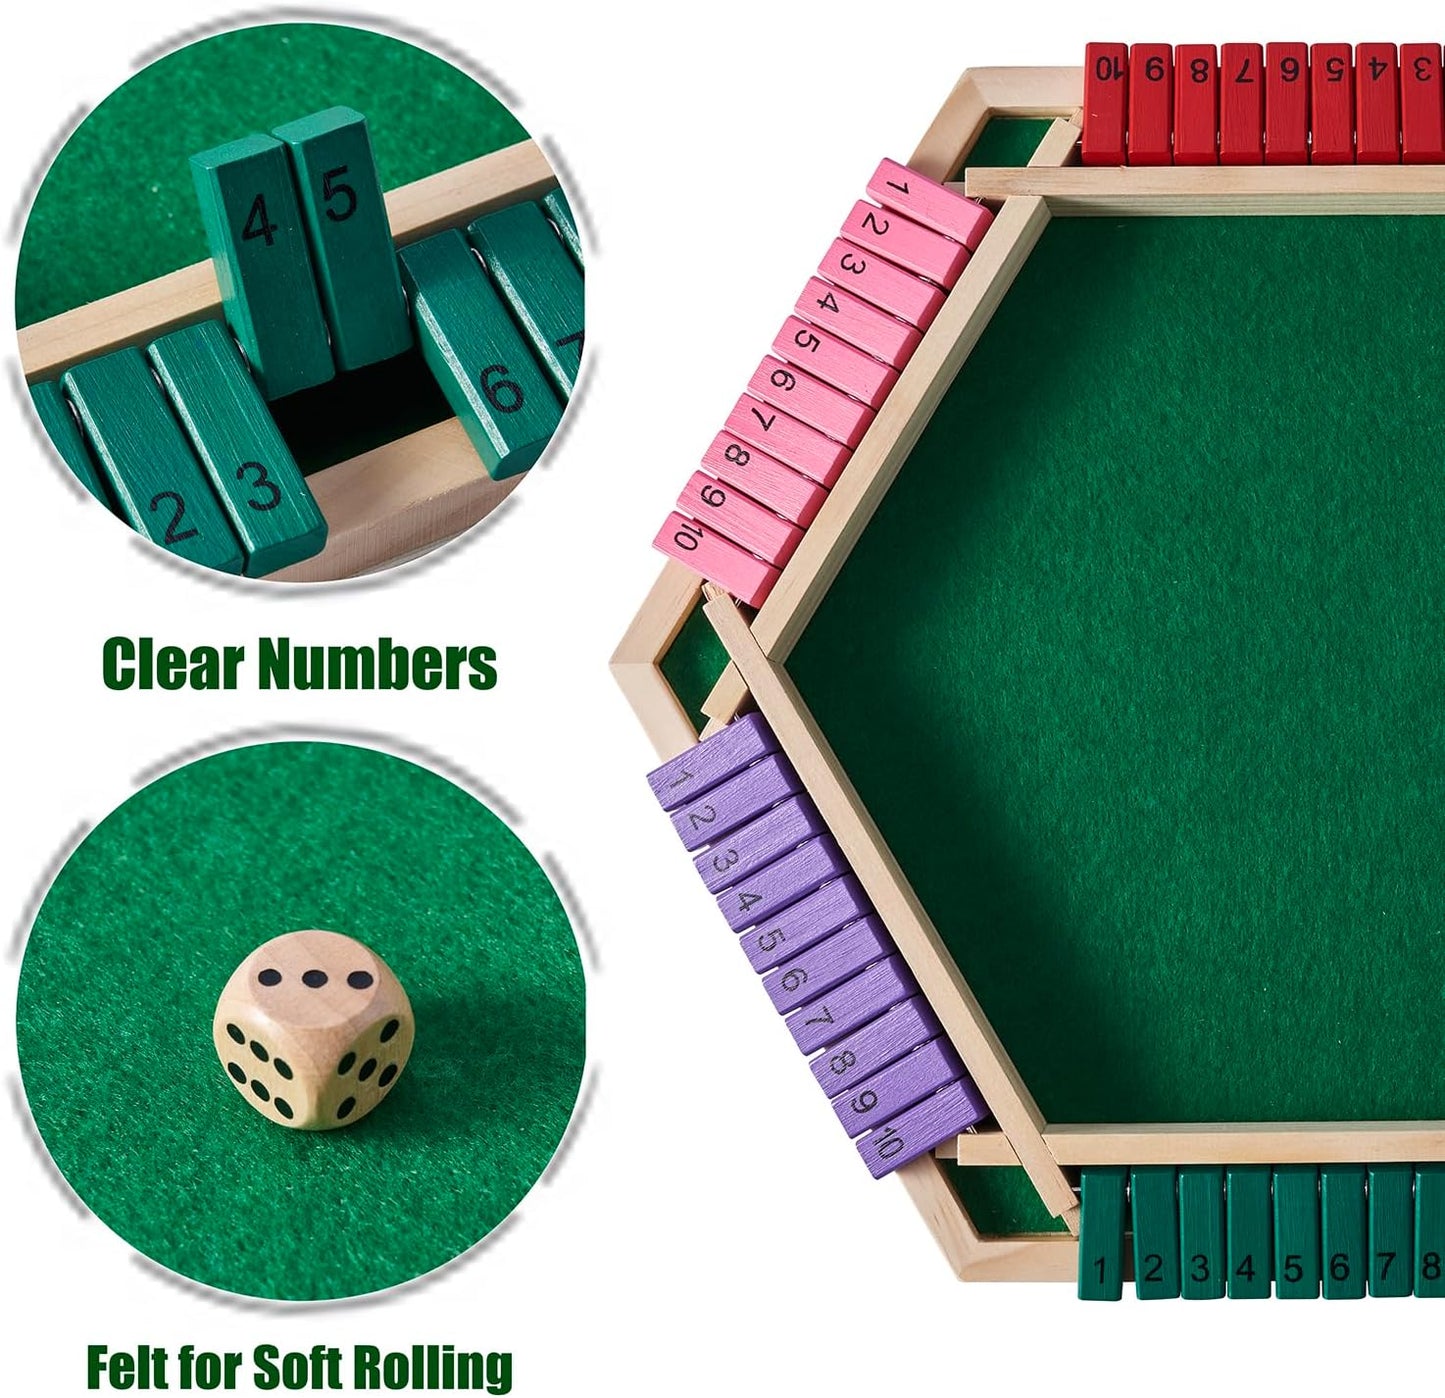 Shut the Box Game for 6 Player with 12+4 Dice - Colorful 6 Sided Wooden Board Math Number Games for Kids Adults Families Party Club (Instructions Included)